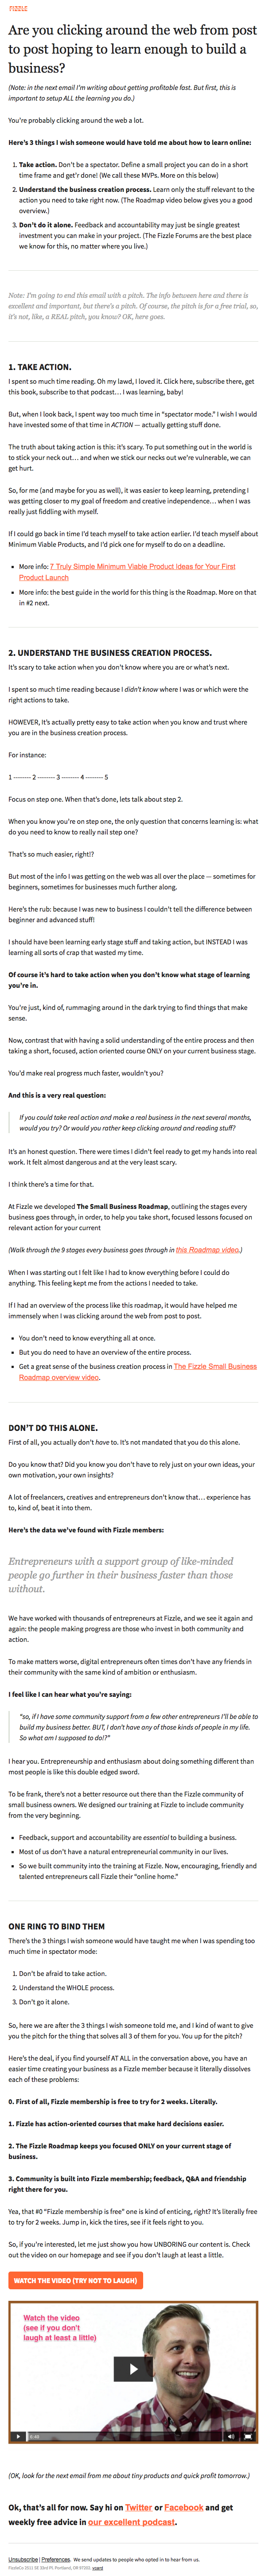 fizzle-newsletter-example.png